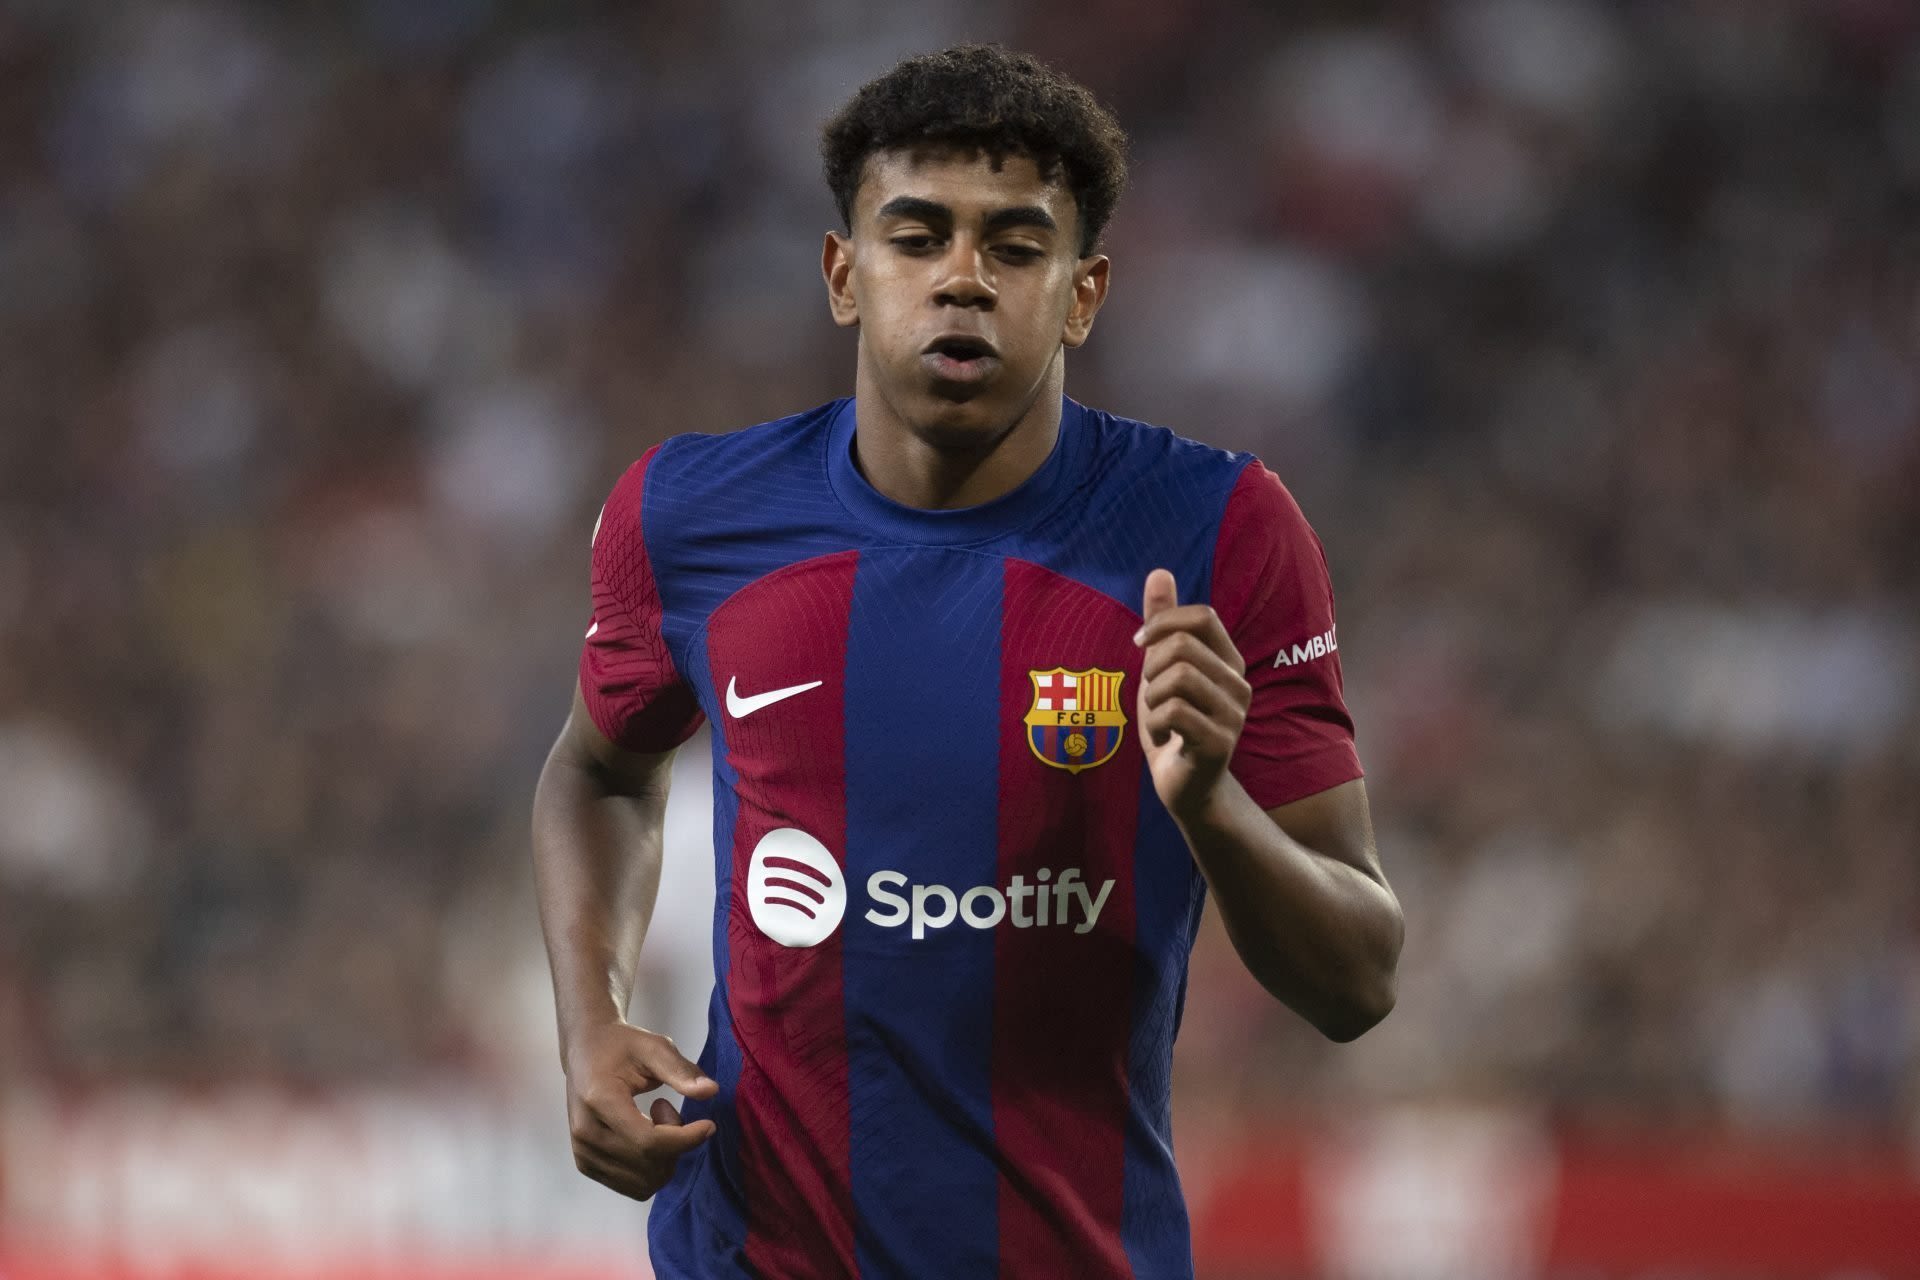 Barcelona wonderkid could be the new No. 10, final decision could hinge on another player